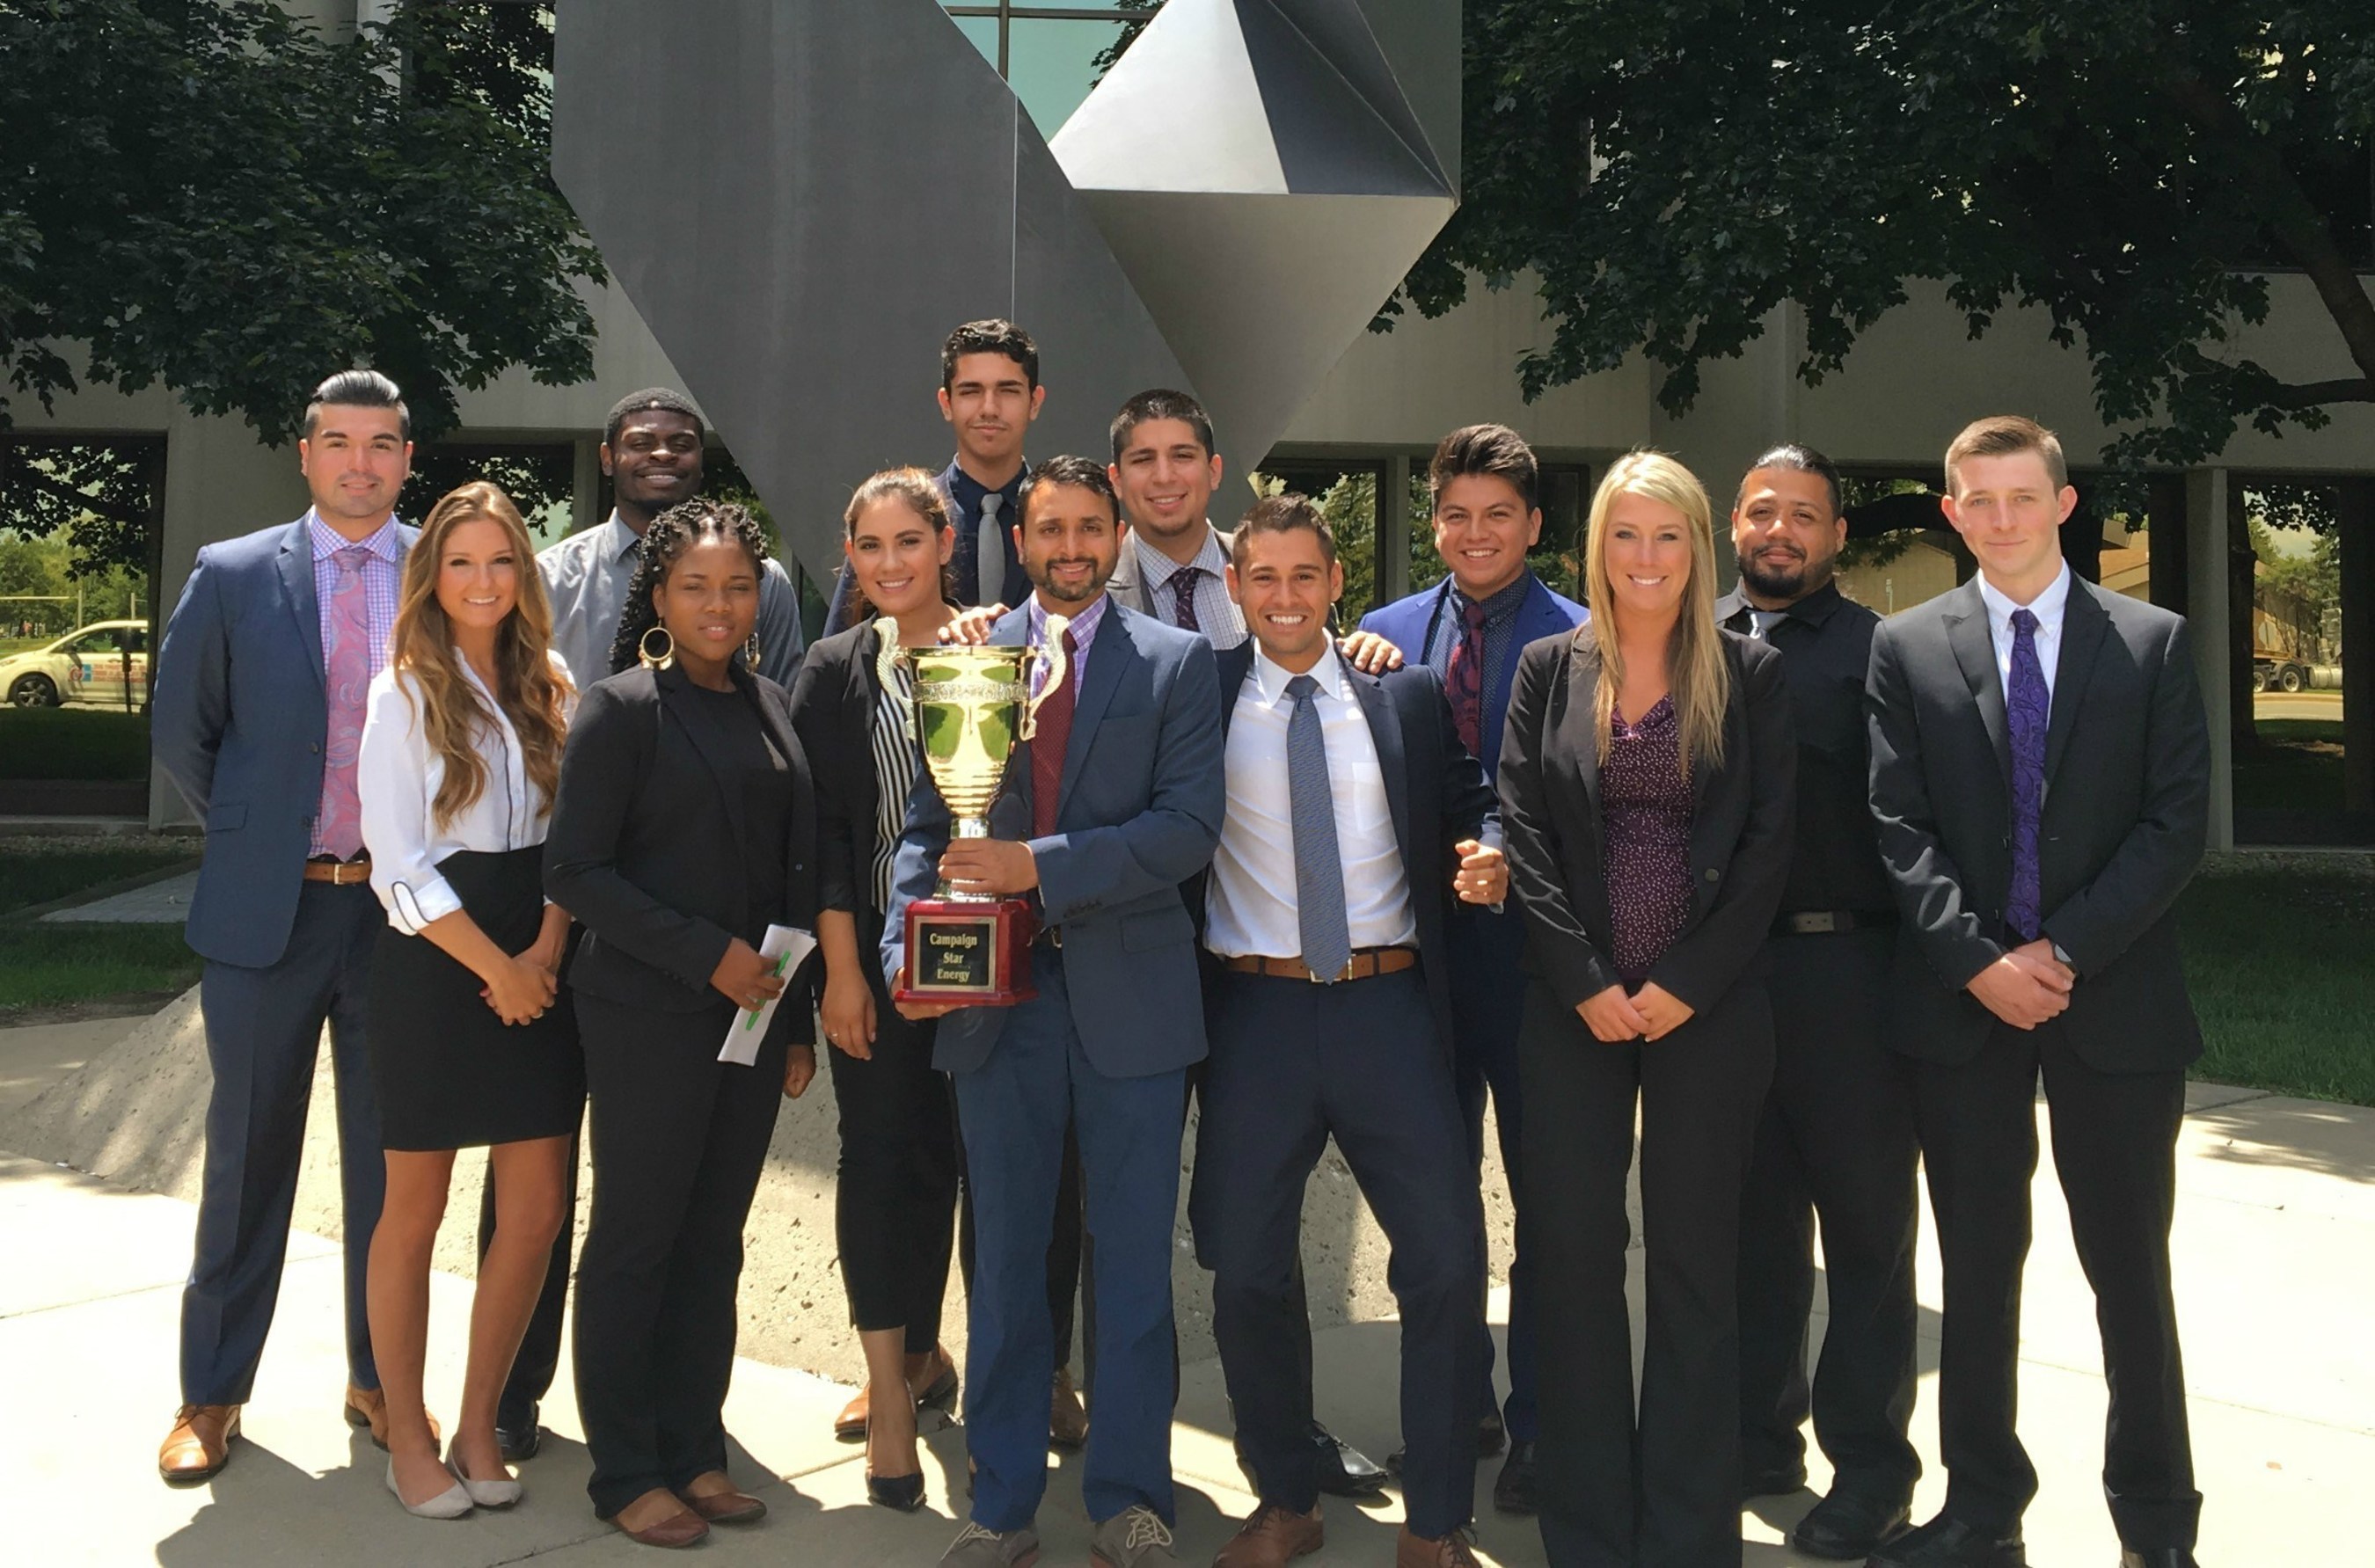 Marketing and consulting company One Chicago, Inc. received a national sales award for outstanding results on behalf of a prestigious energy client. President Juan Olmos and the One Chicago staff pose with the Campaign Cup trophy.